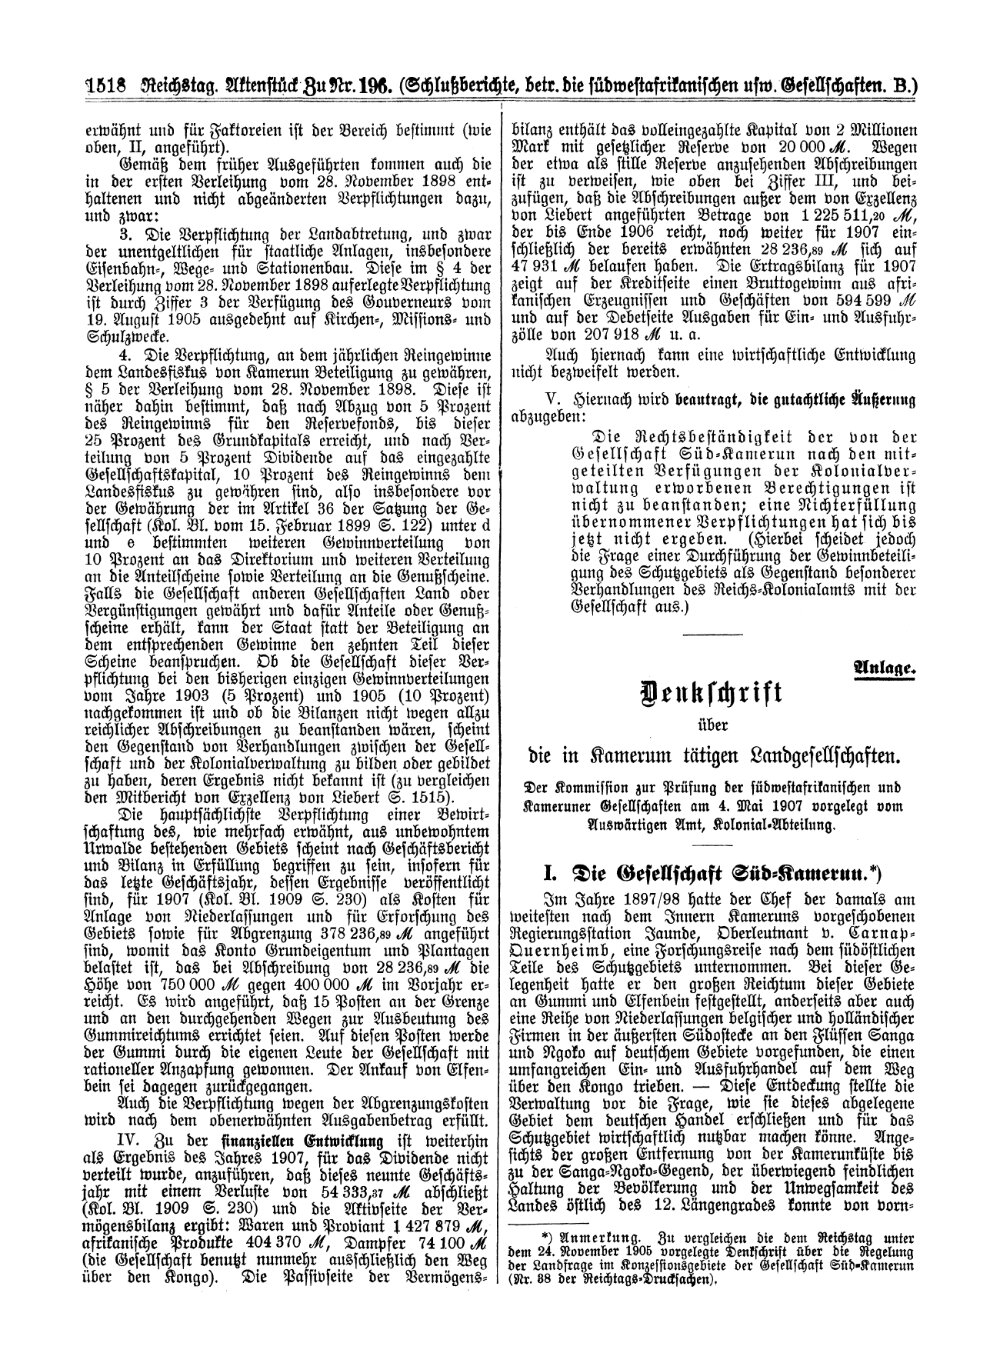 Scan of page 1518